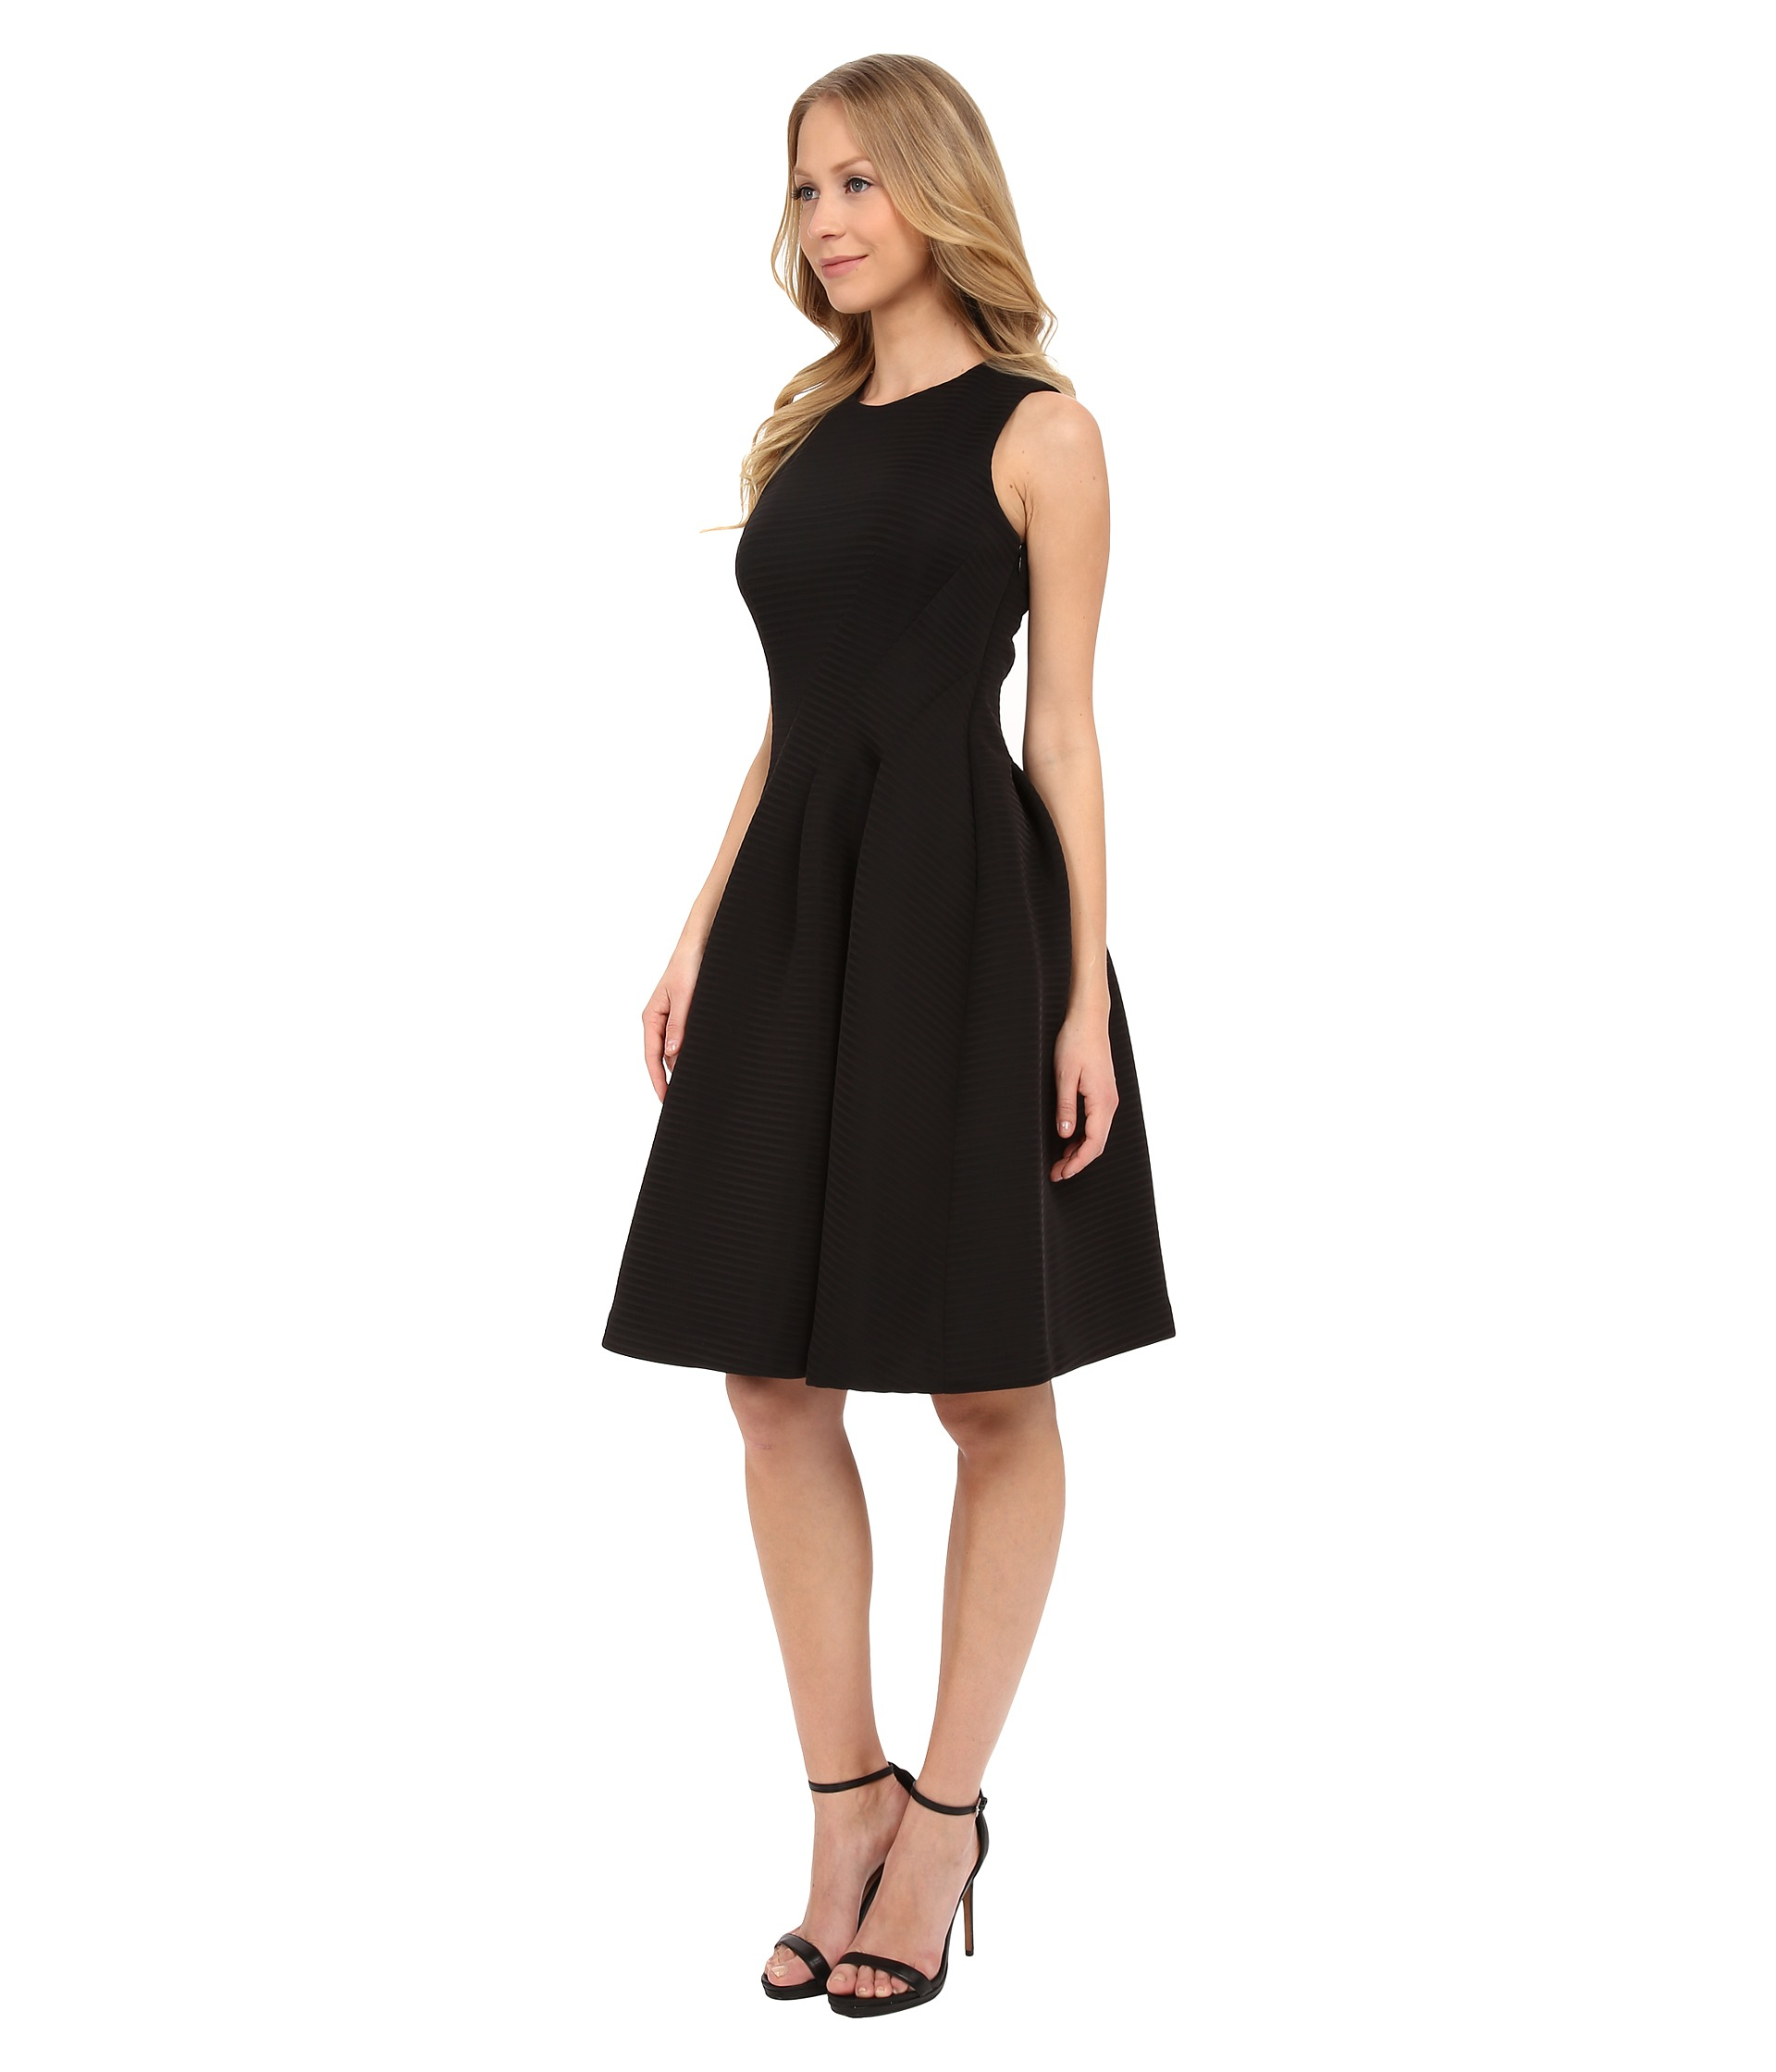 Calvin Klein Black Dress Fit and Flare